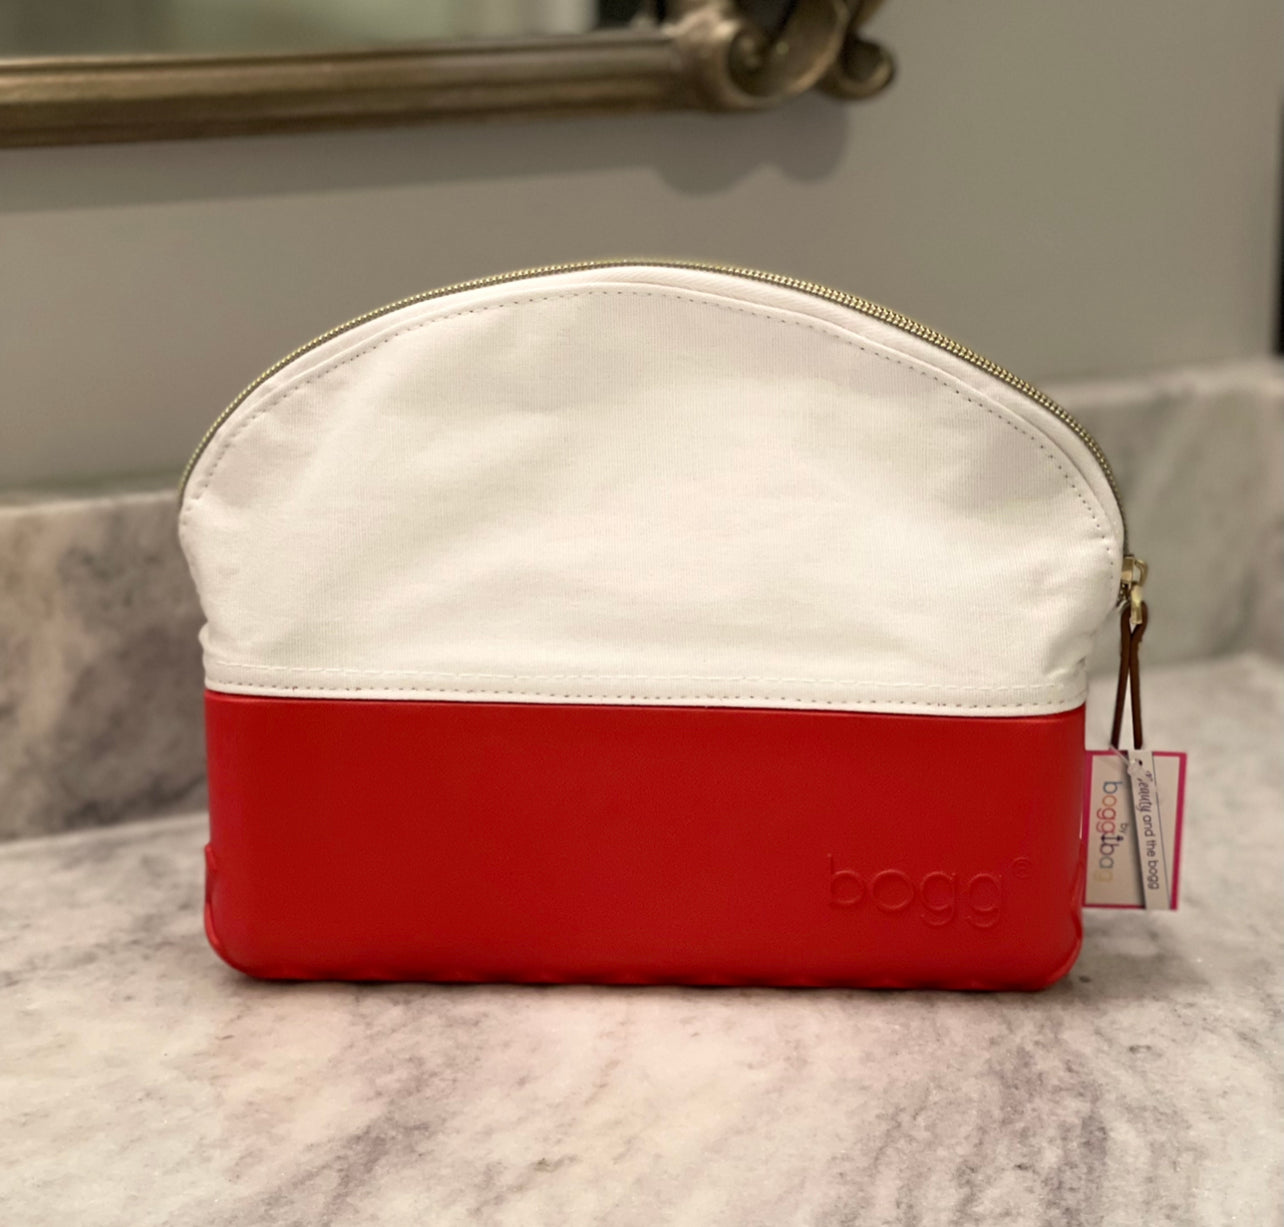 Bogg Bag - Monogrammed Beauty and the Bogg Cosmetic Bags